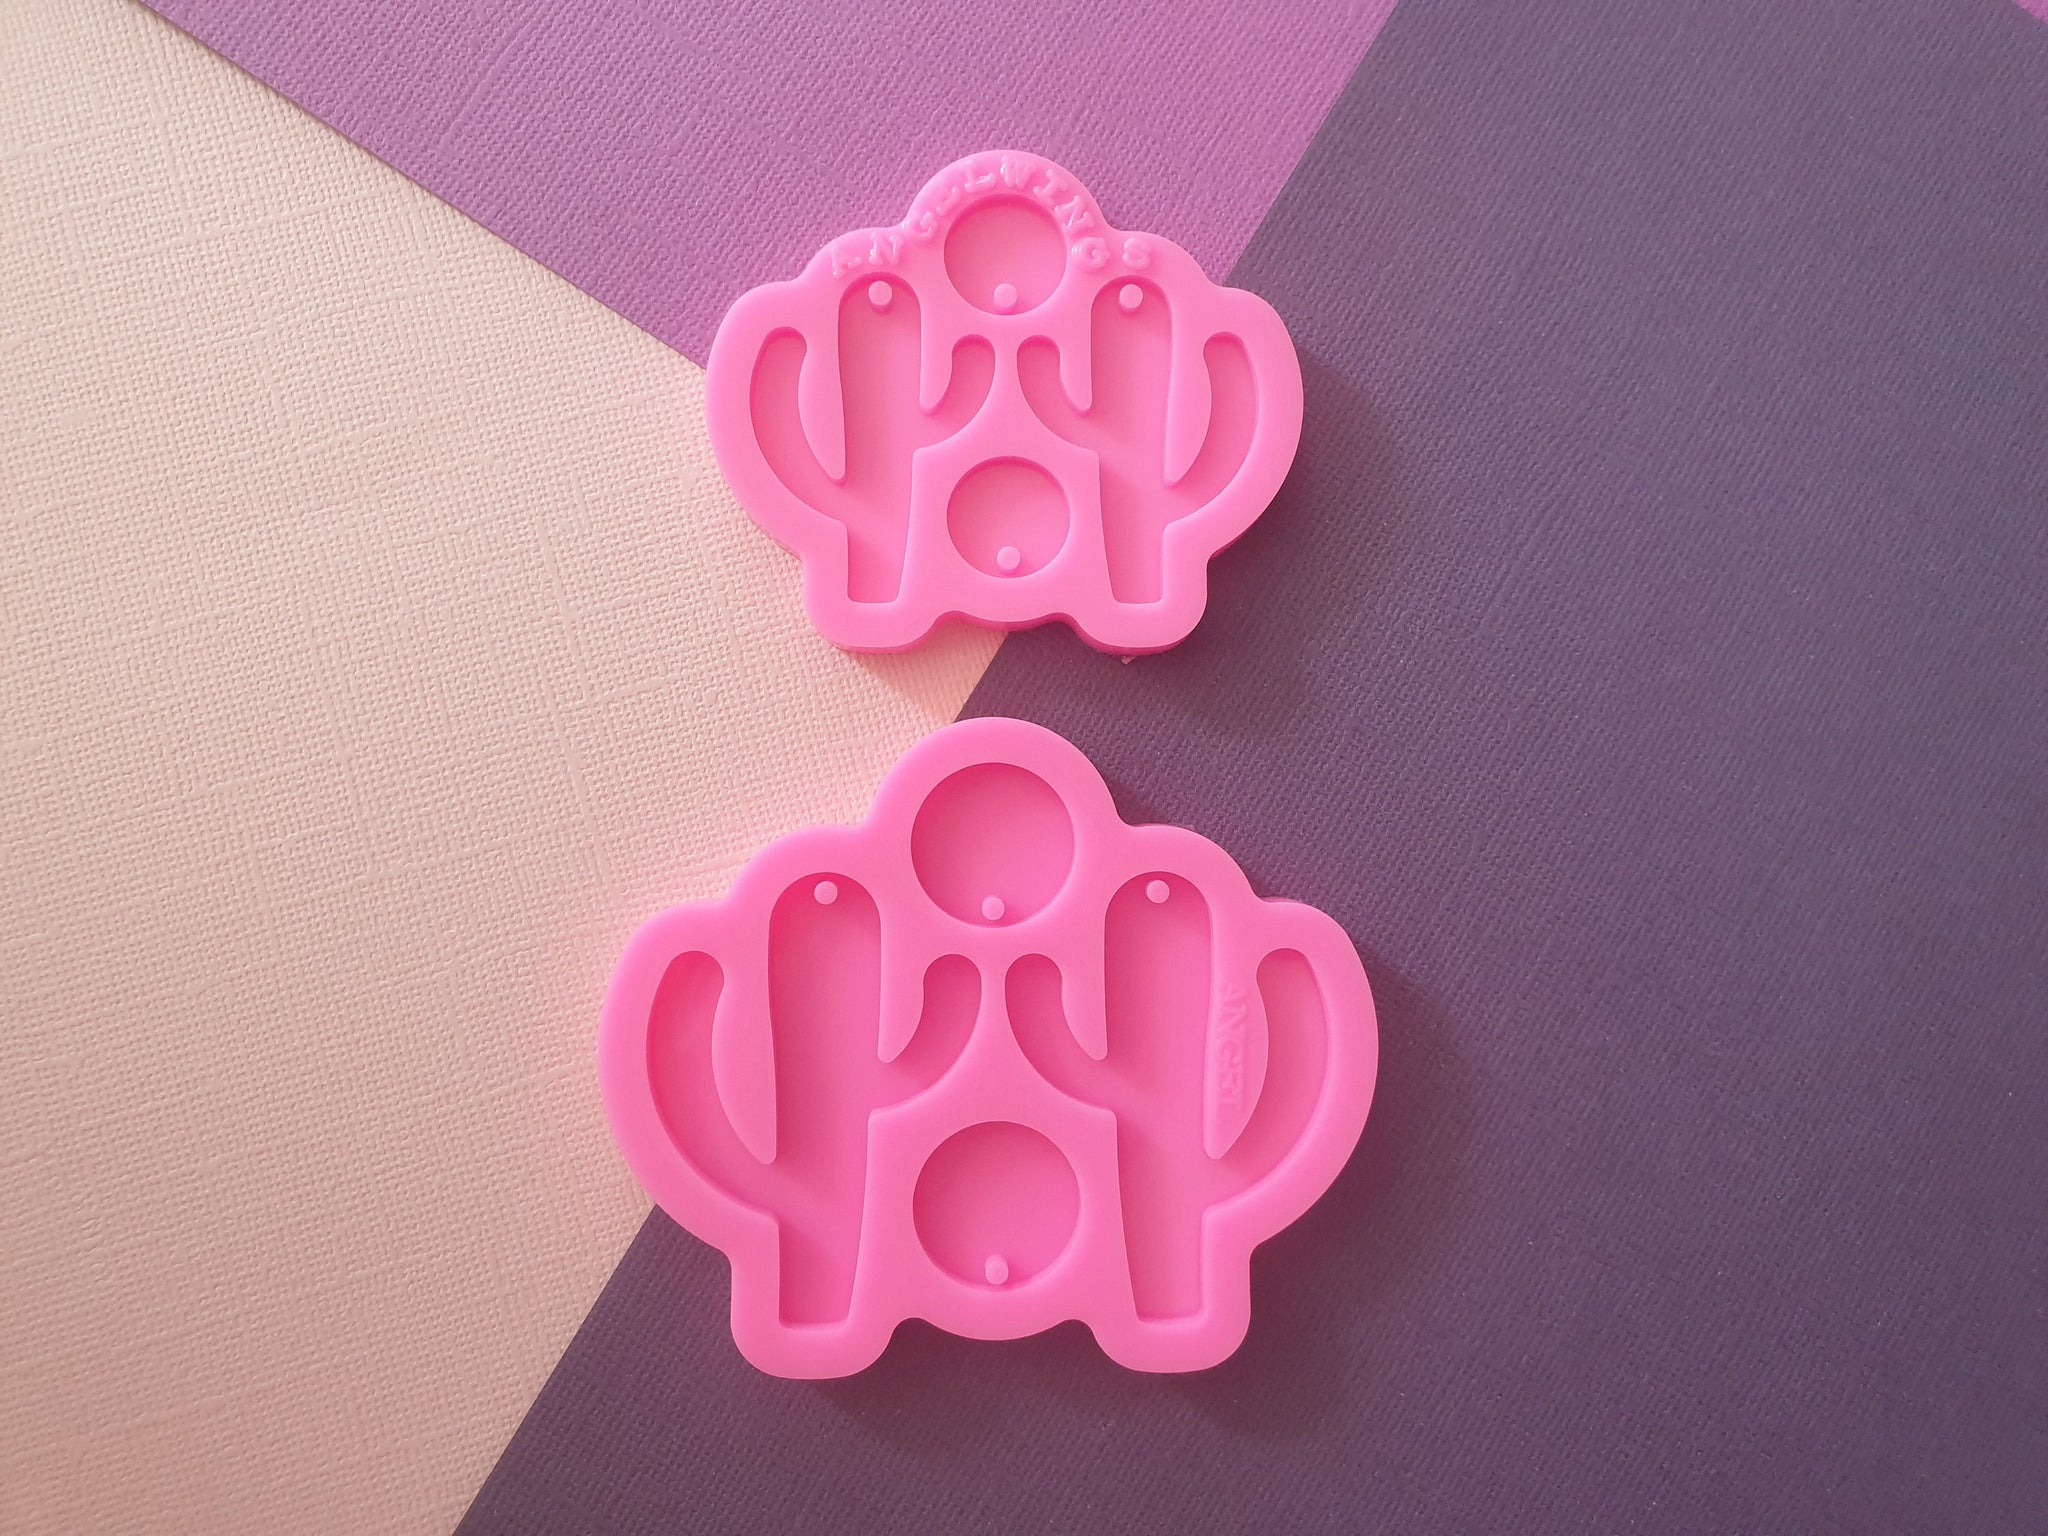 1pc Cactus earring mould, dangle drop mold, shiny Silicone mold, DIY Jewelry Making, glitter epoxy Resin mould, Jewellery supplies australia